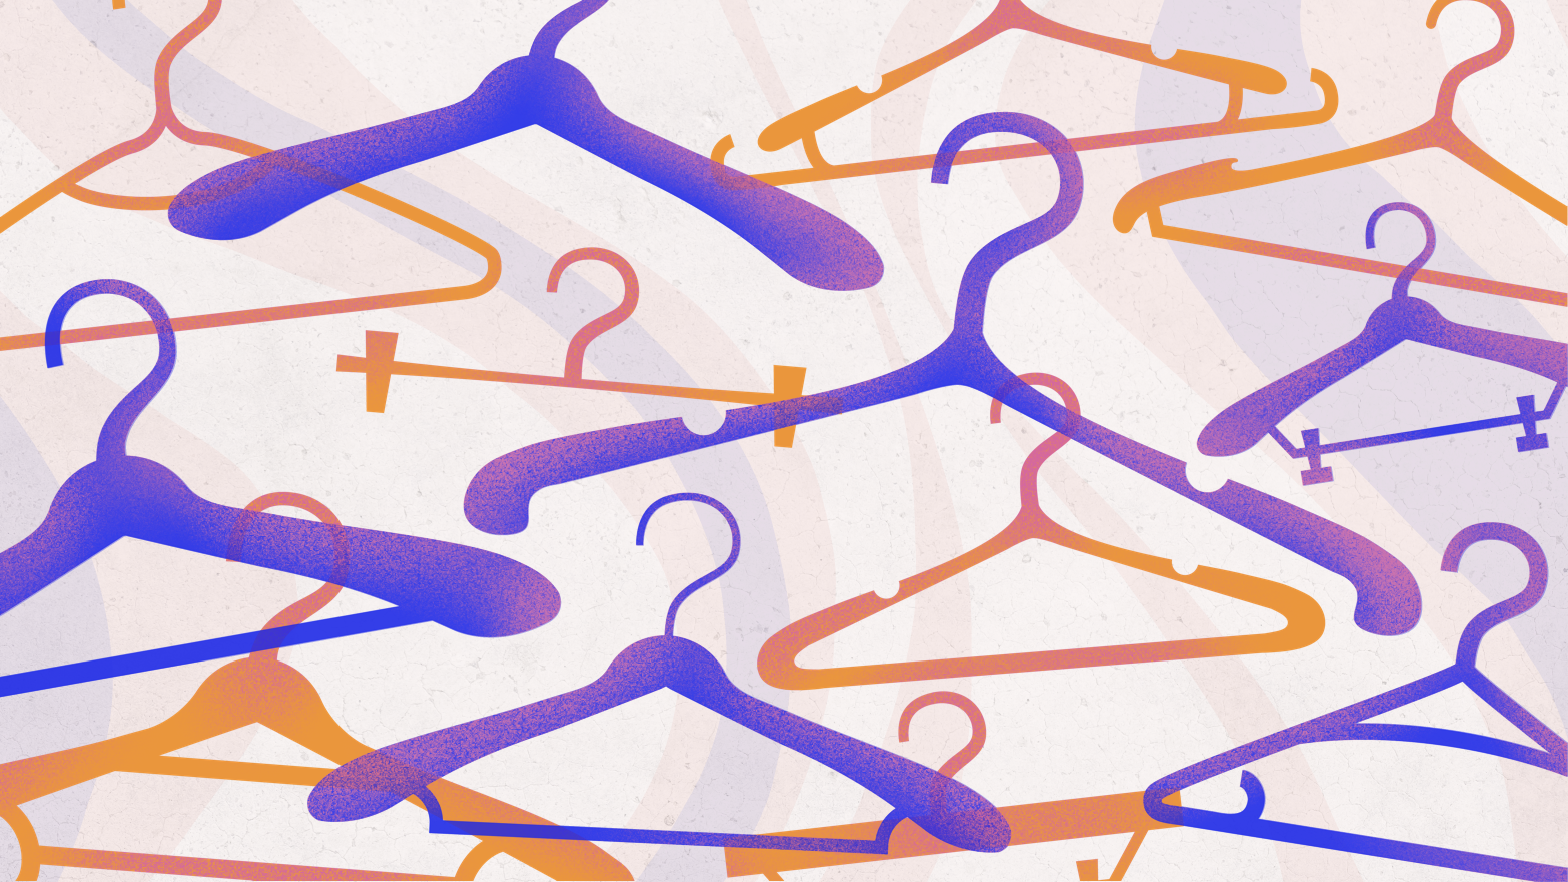 Multicoloured clothes hangers overlaid on a wavy graphic background.